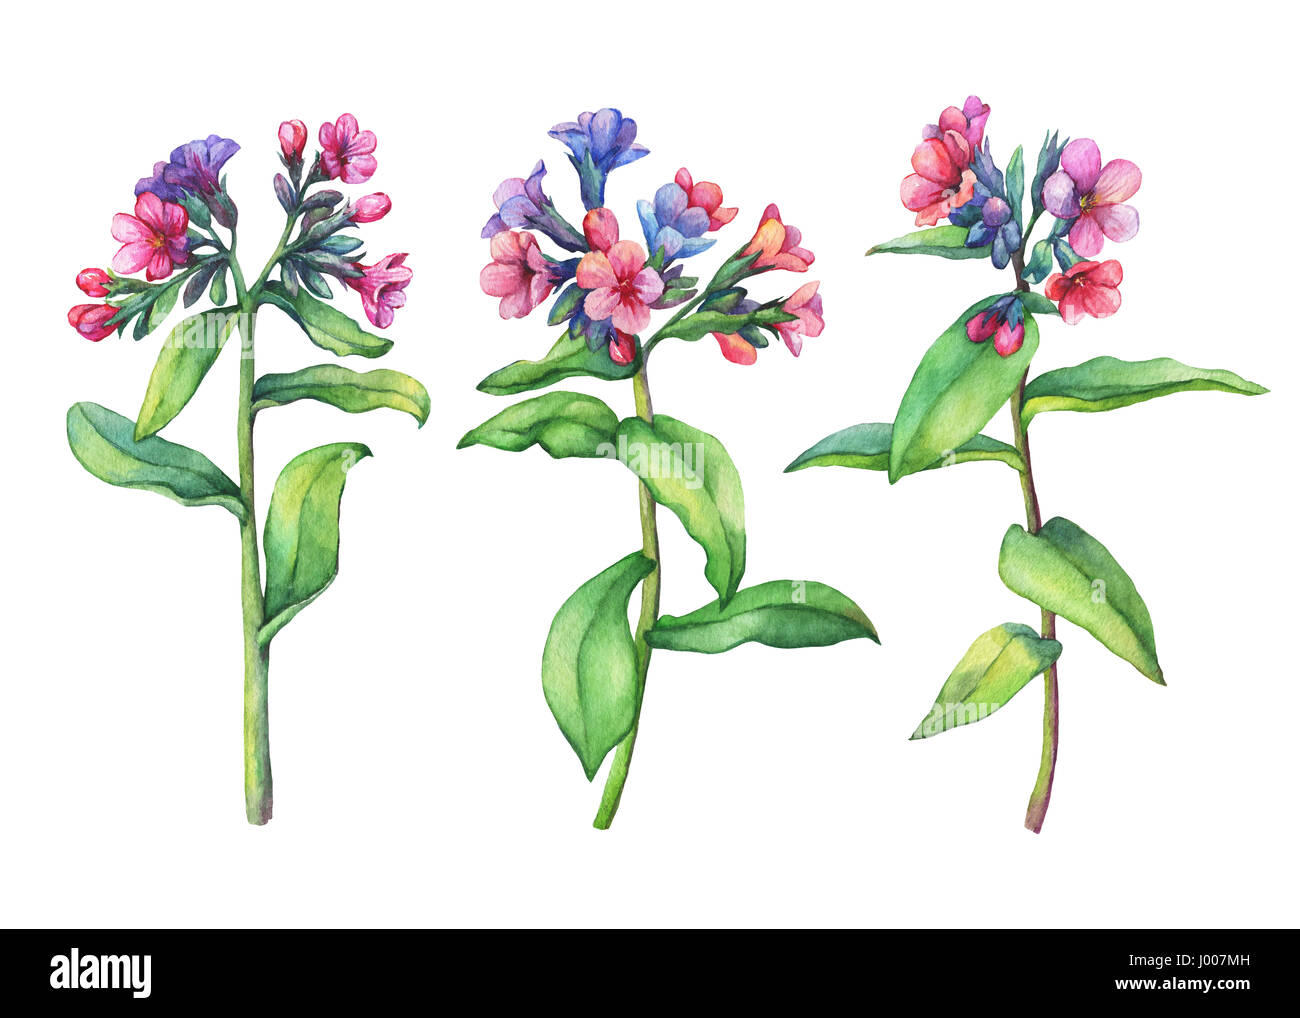 Set of first spring wild flowers - Dark lungwort medicinal (Pulmonaria officinalis). Hand drawn watercolor painting on white background. Stock Photo